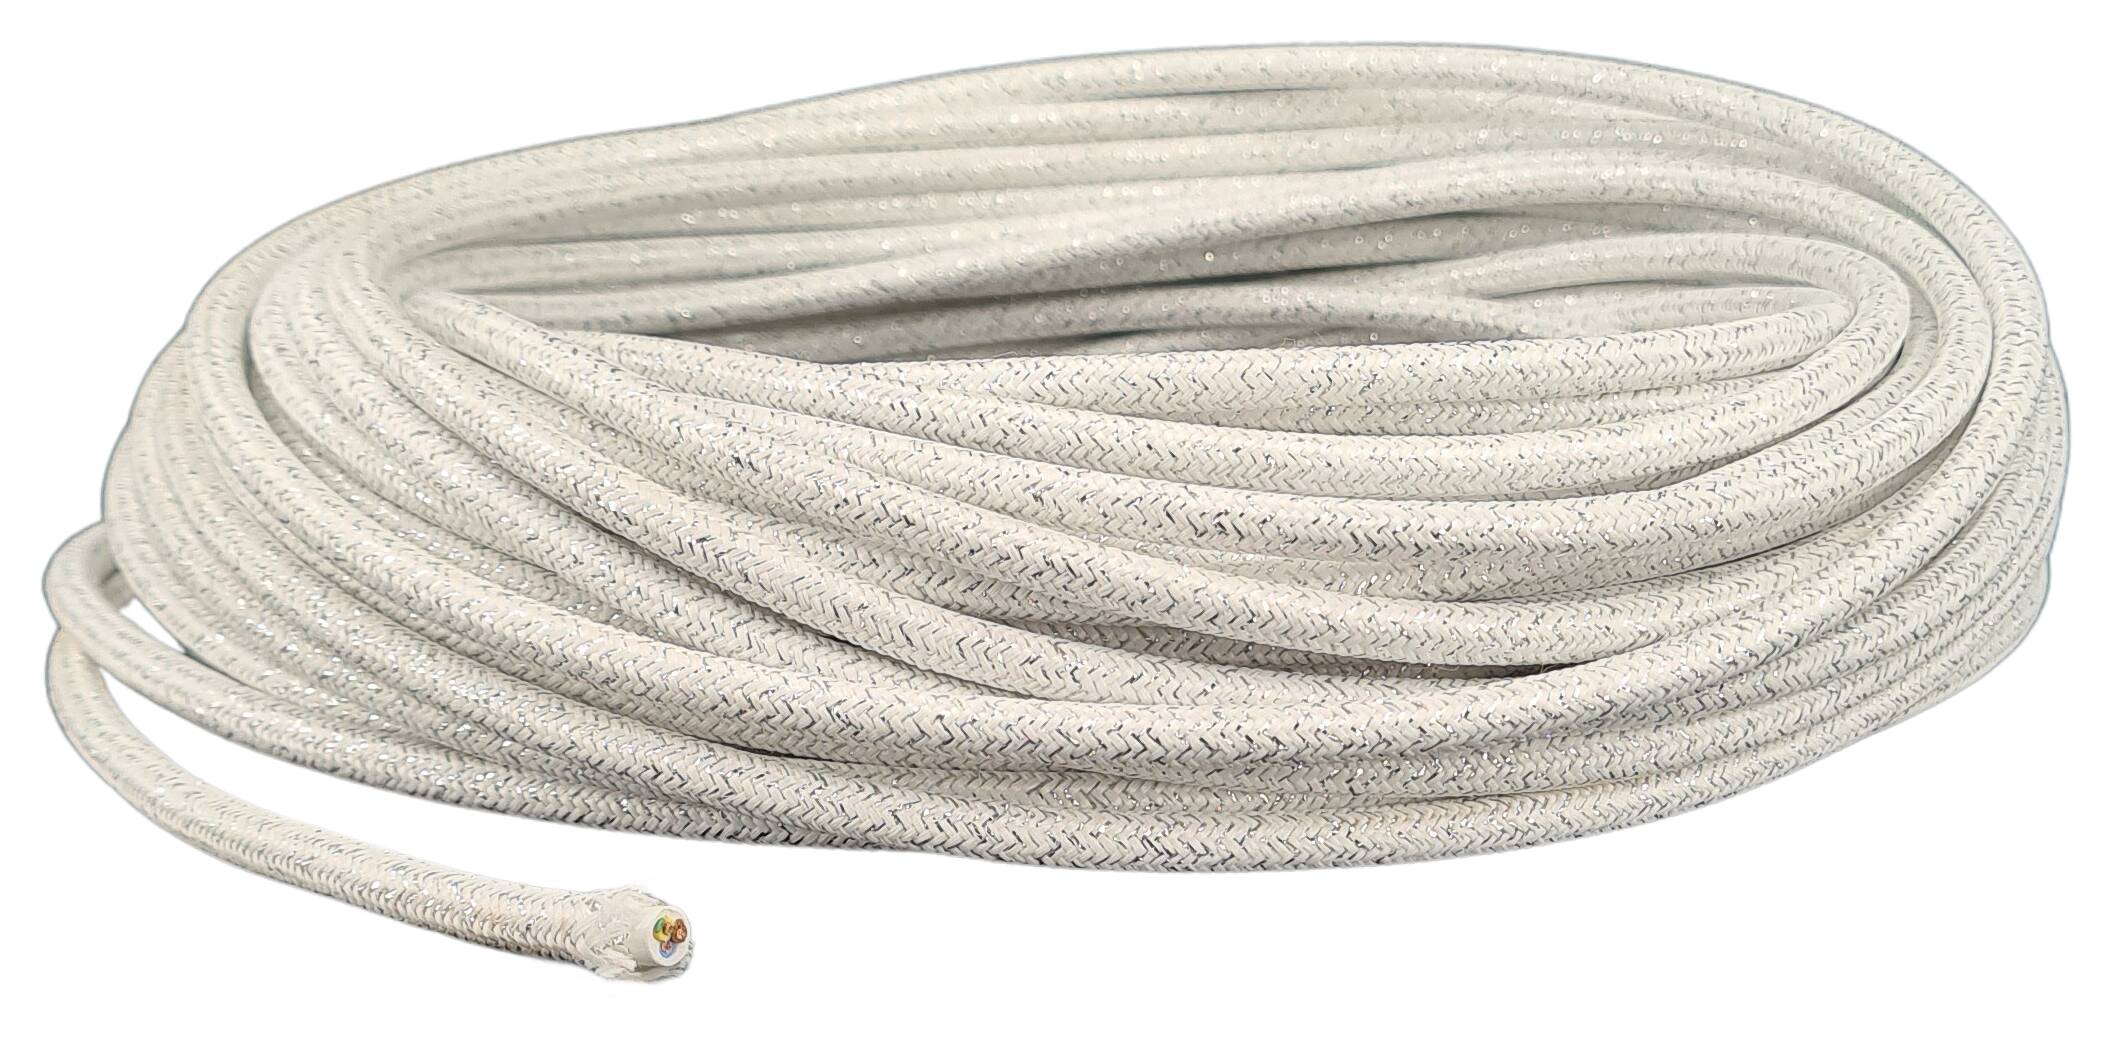 Cable 3G 0,75 H03VV-F textile braided metallic RAL 9016 white